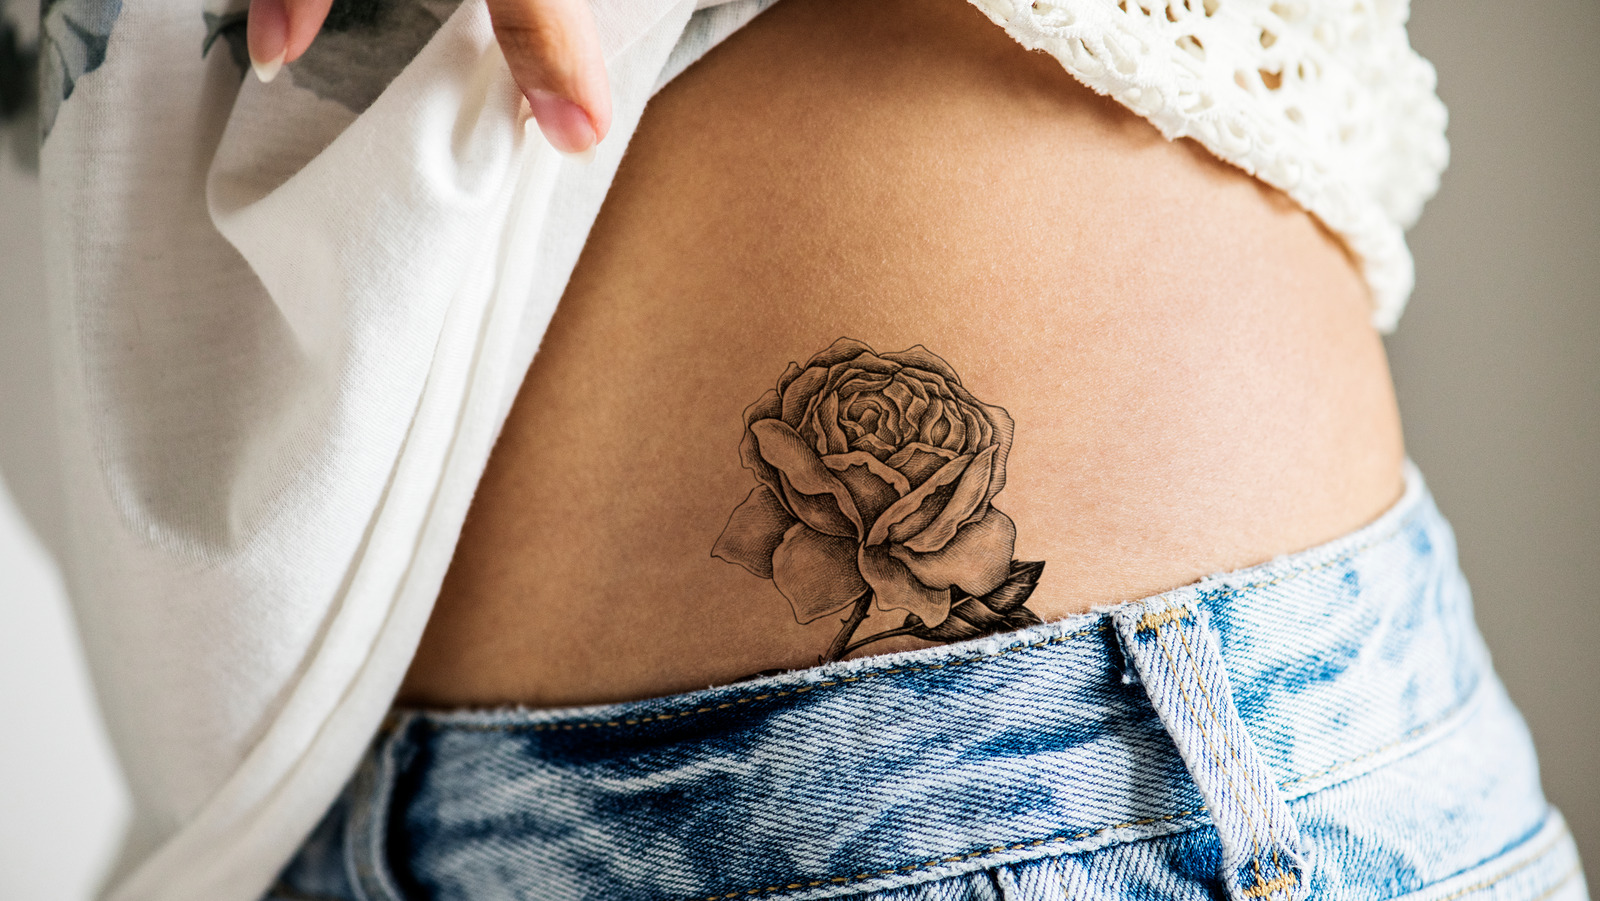 Here's What You Should Do To Take Care Of A Peeling Tattoo